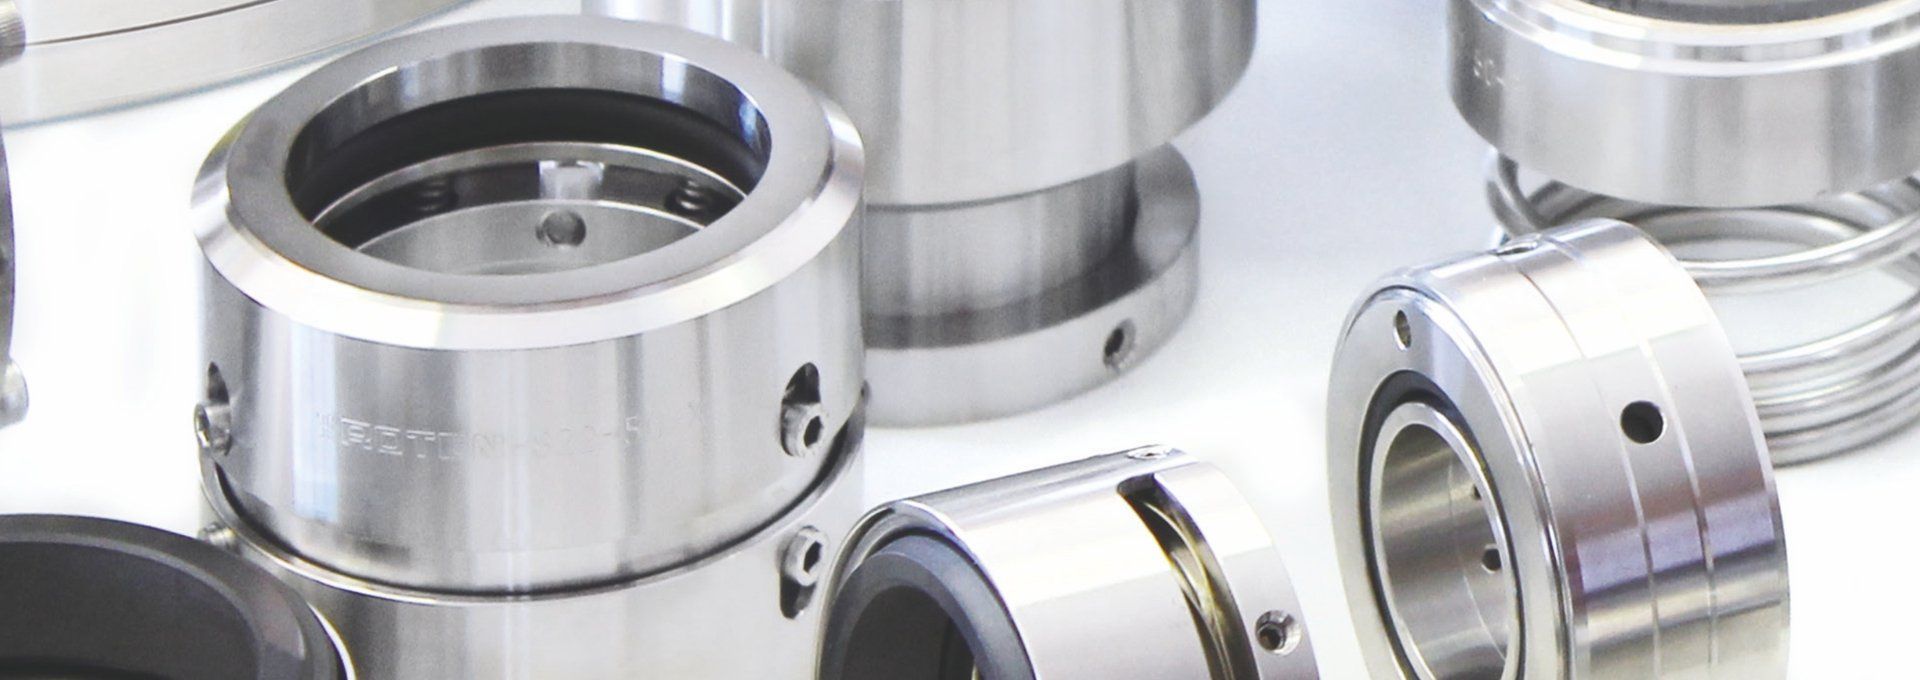 HIGH QUALITY MECHANICAL SEALS AT COMPETITIVE PRICES